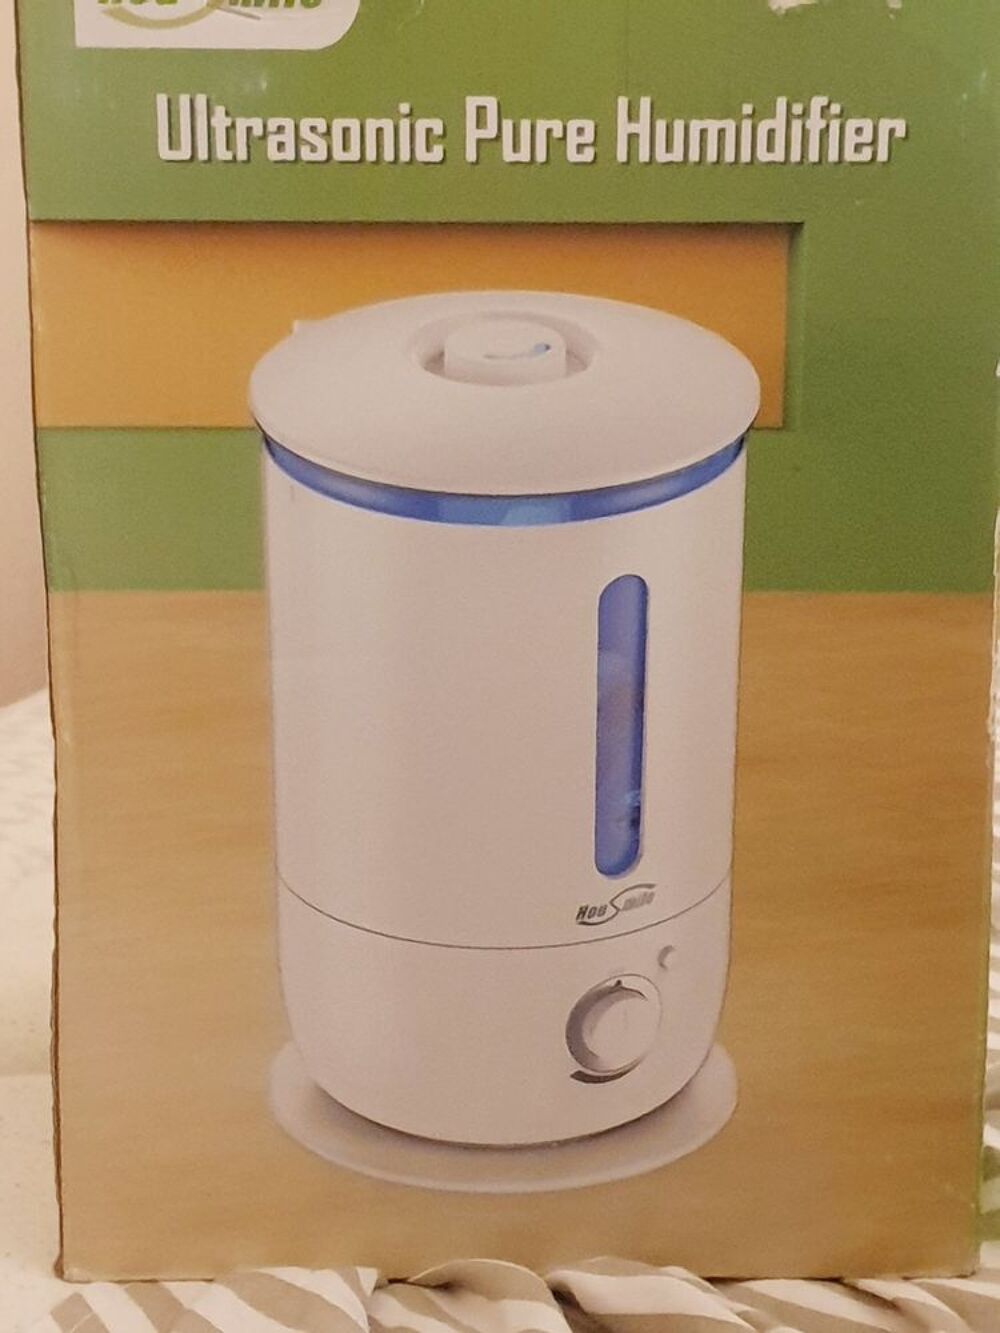 Ultrasonic pure humidifier Puriculture